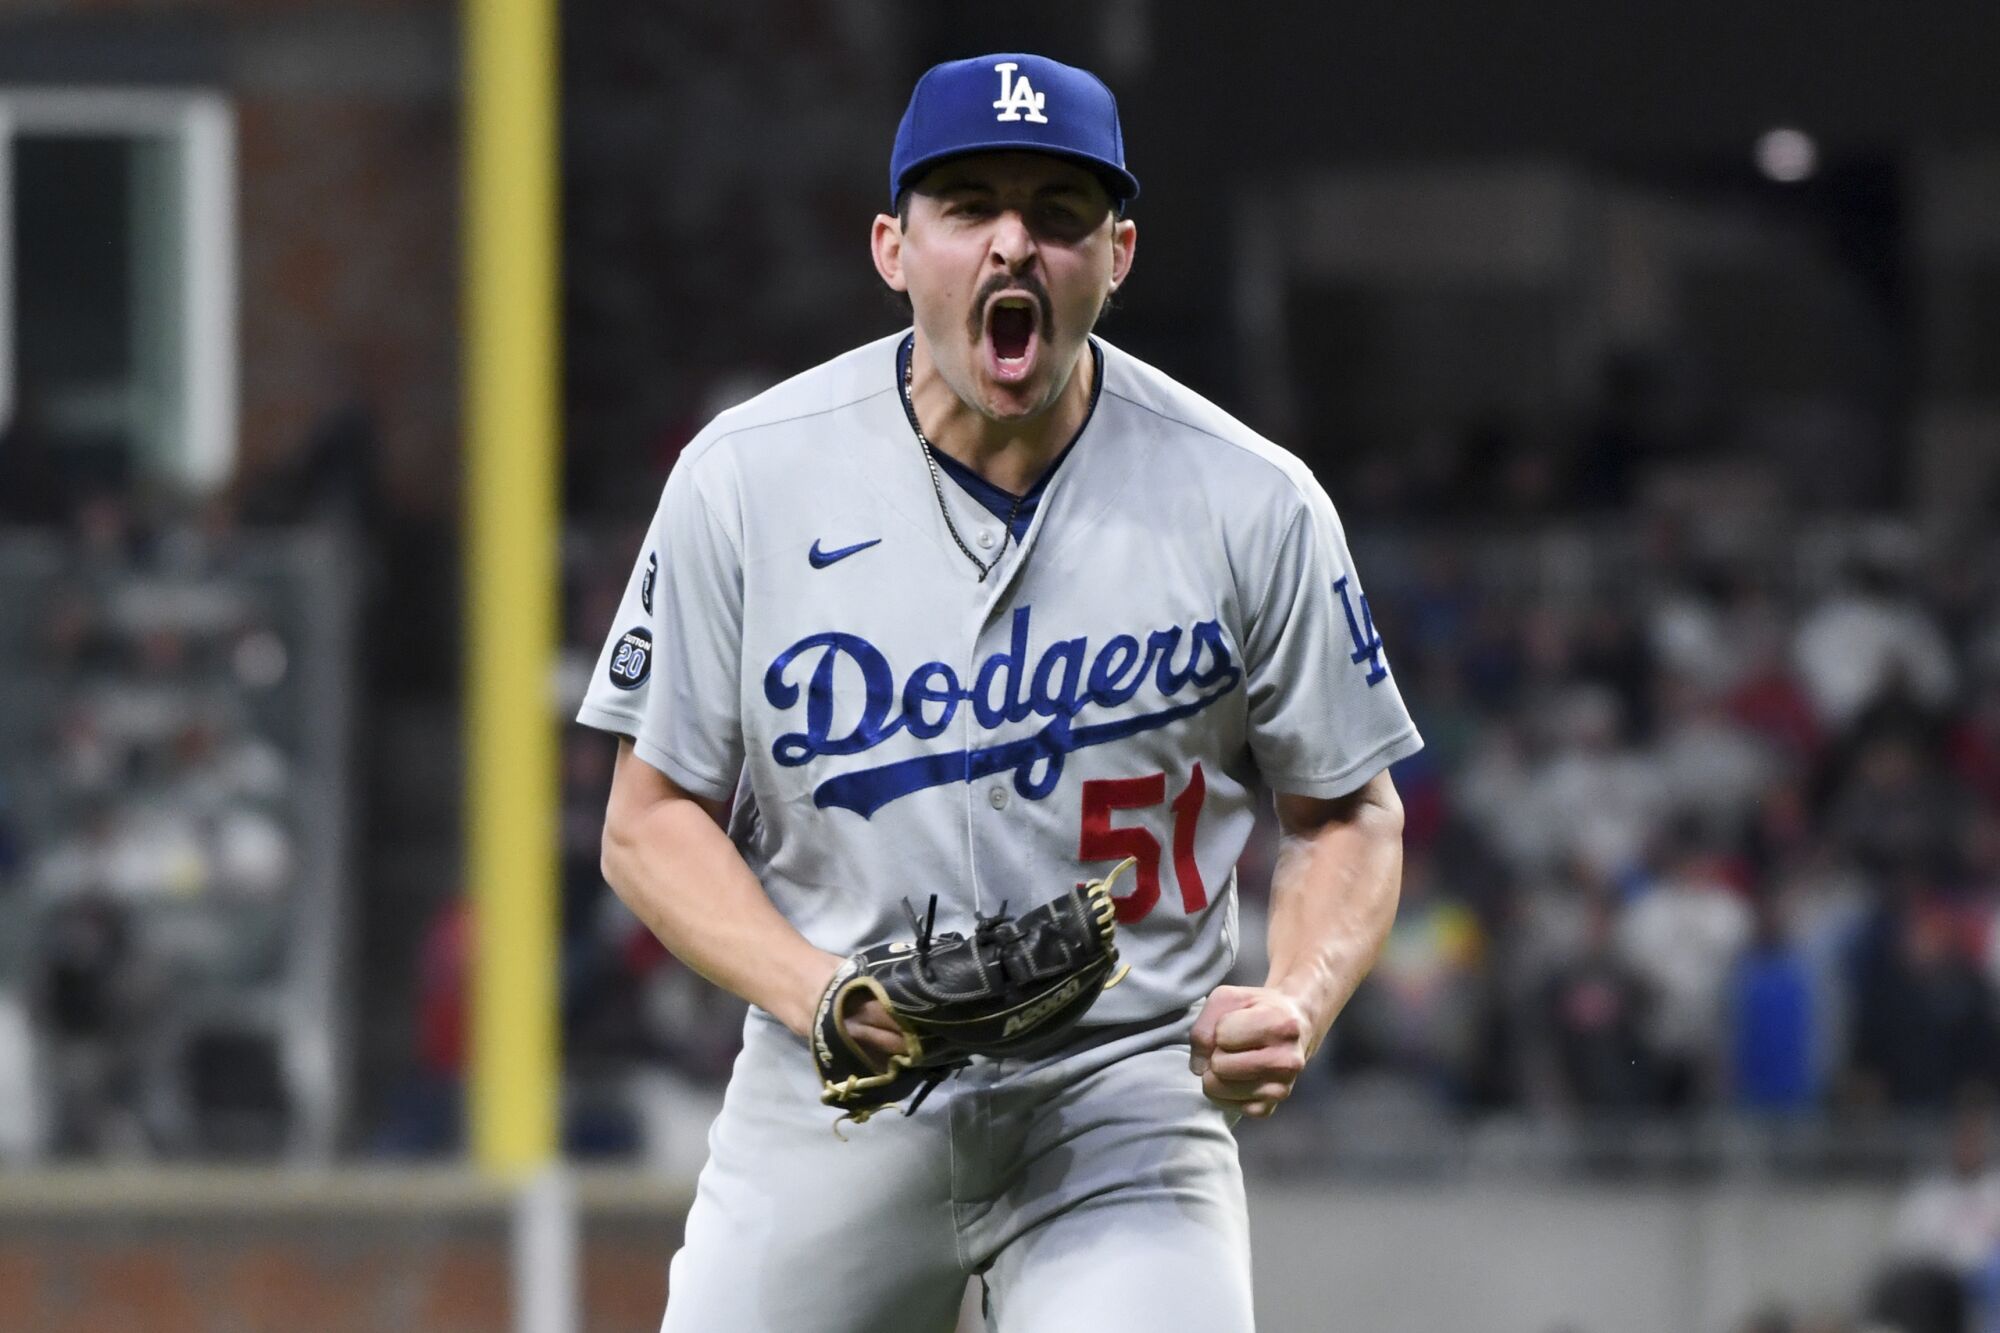 Dodgers reliever Alex Vesia is released after he retired the side during a playoff game last season.